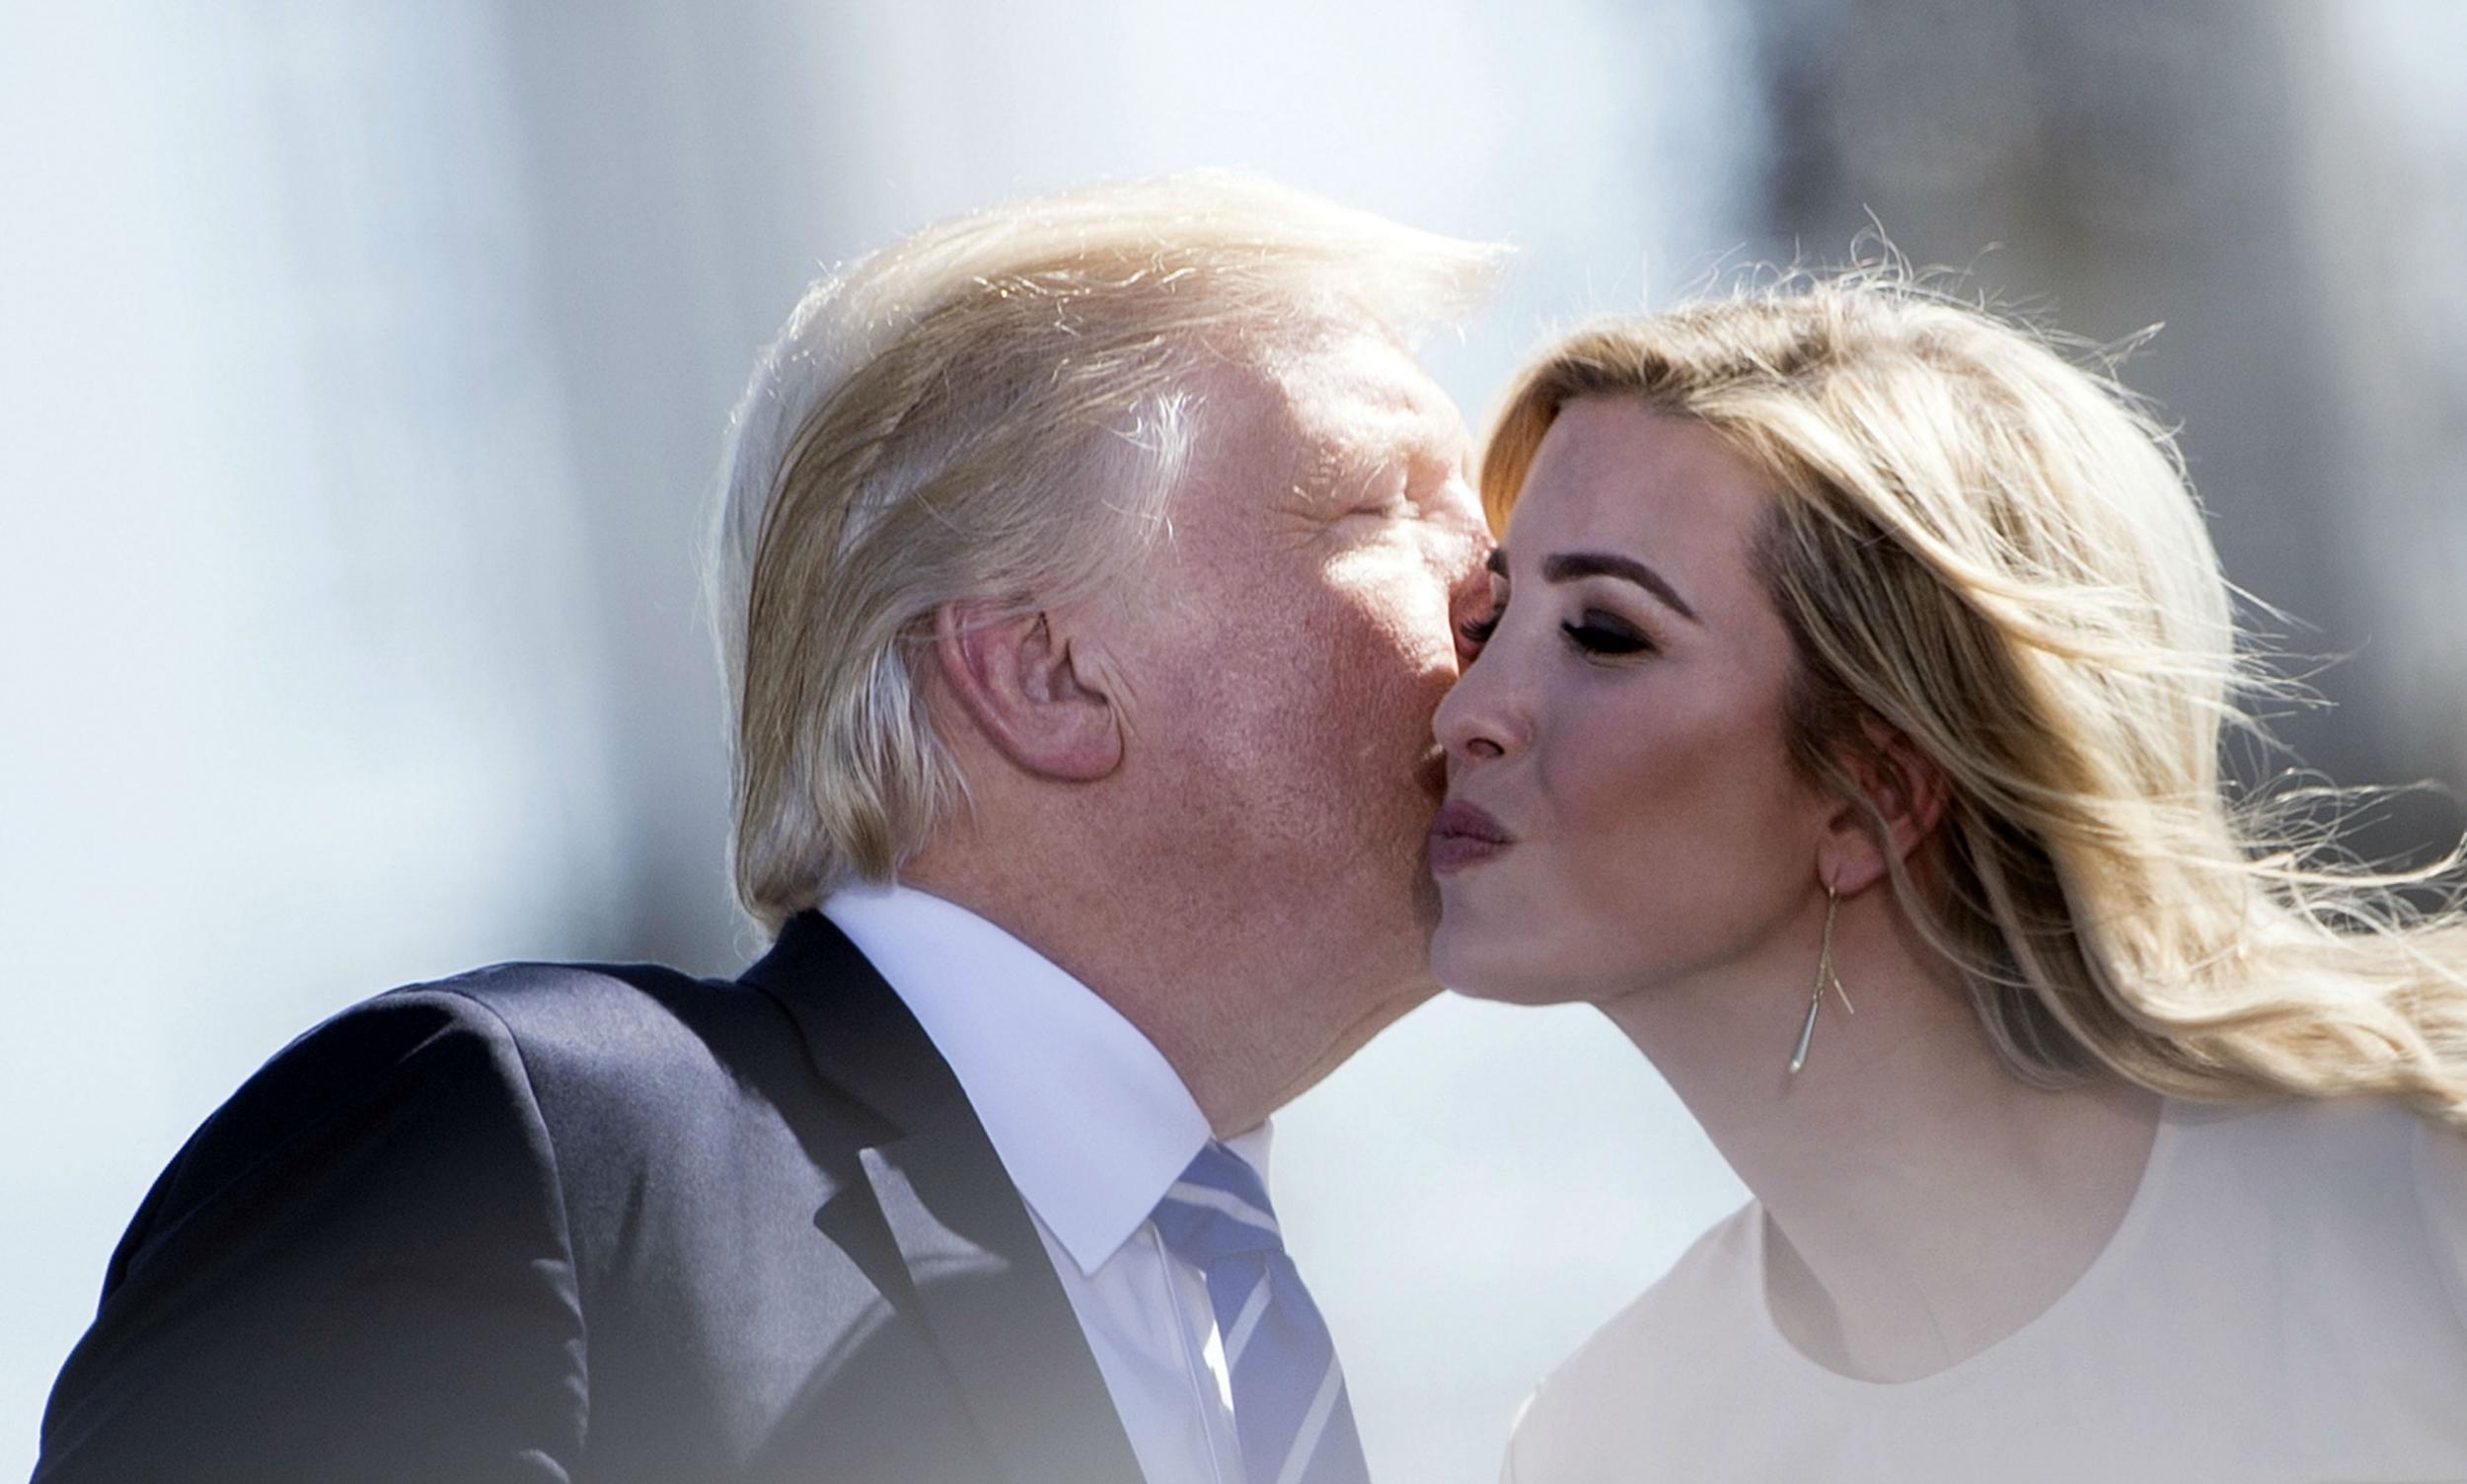 For many years, Mr Trump made a point of praising his daughter's physical attributes